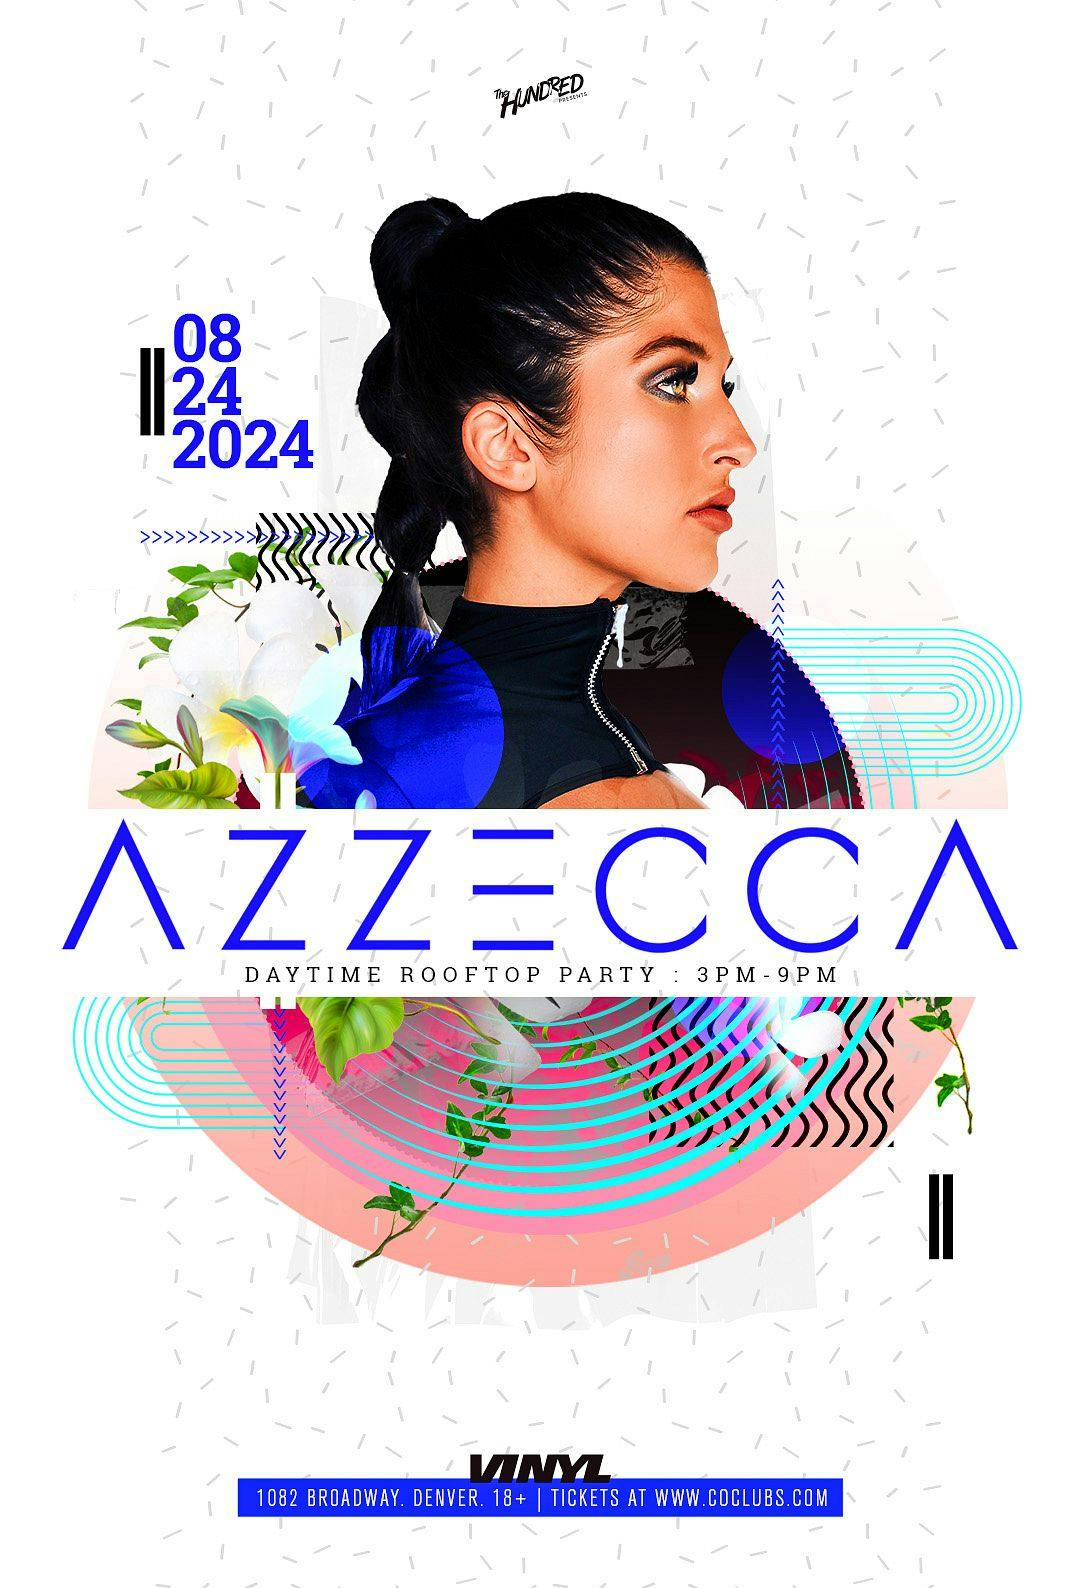 Azzecca Rooftop Party